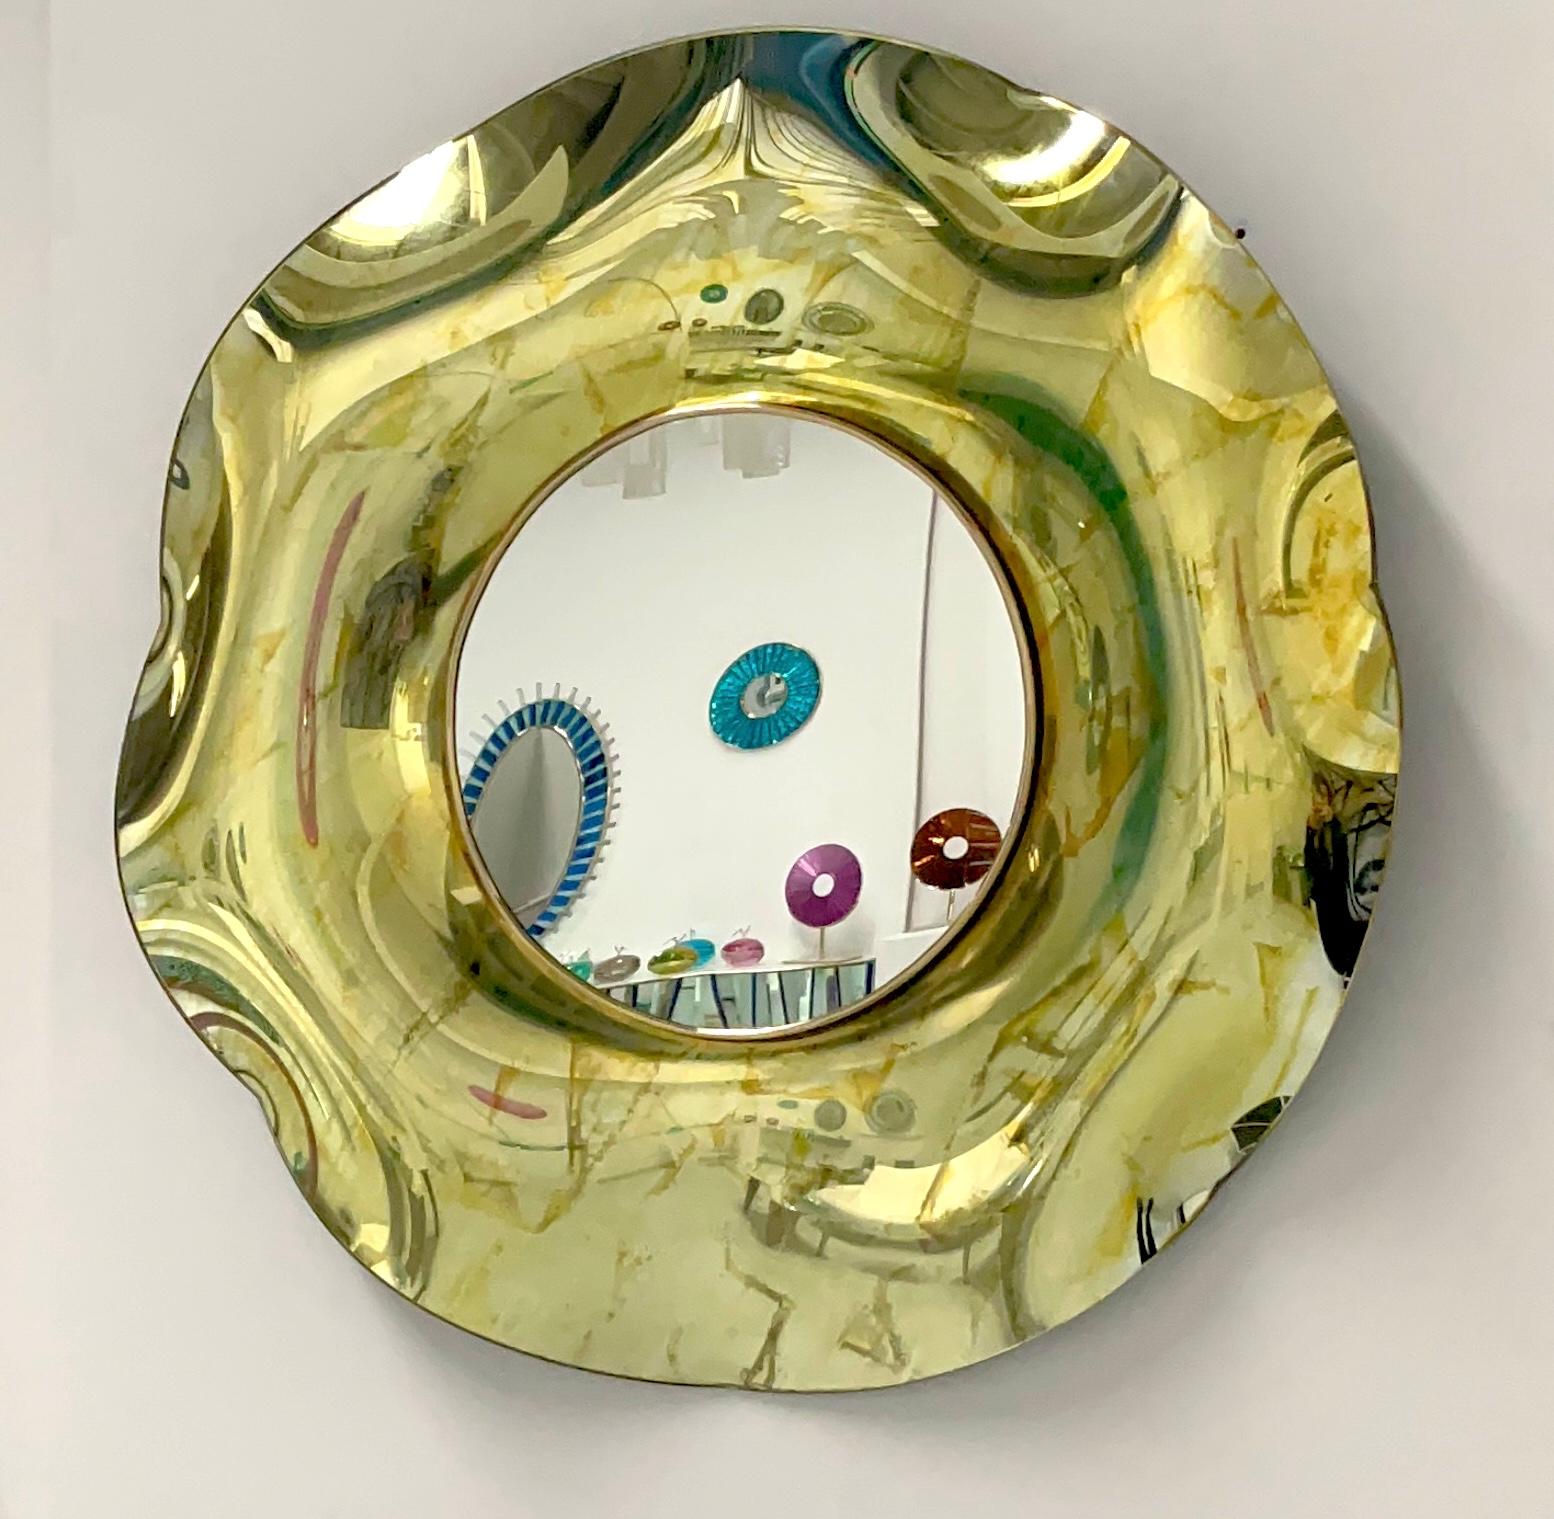 Contemporary 'Undulate' Handmade Gold Crystal Mirror Dia. 40'' by Ghiró Studio For Sale 4